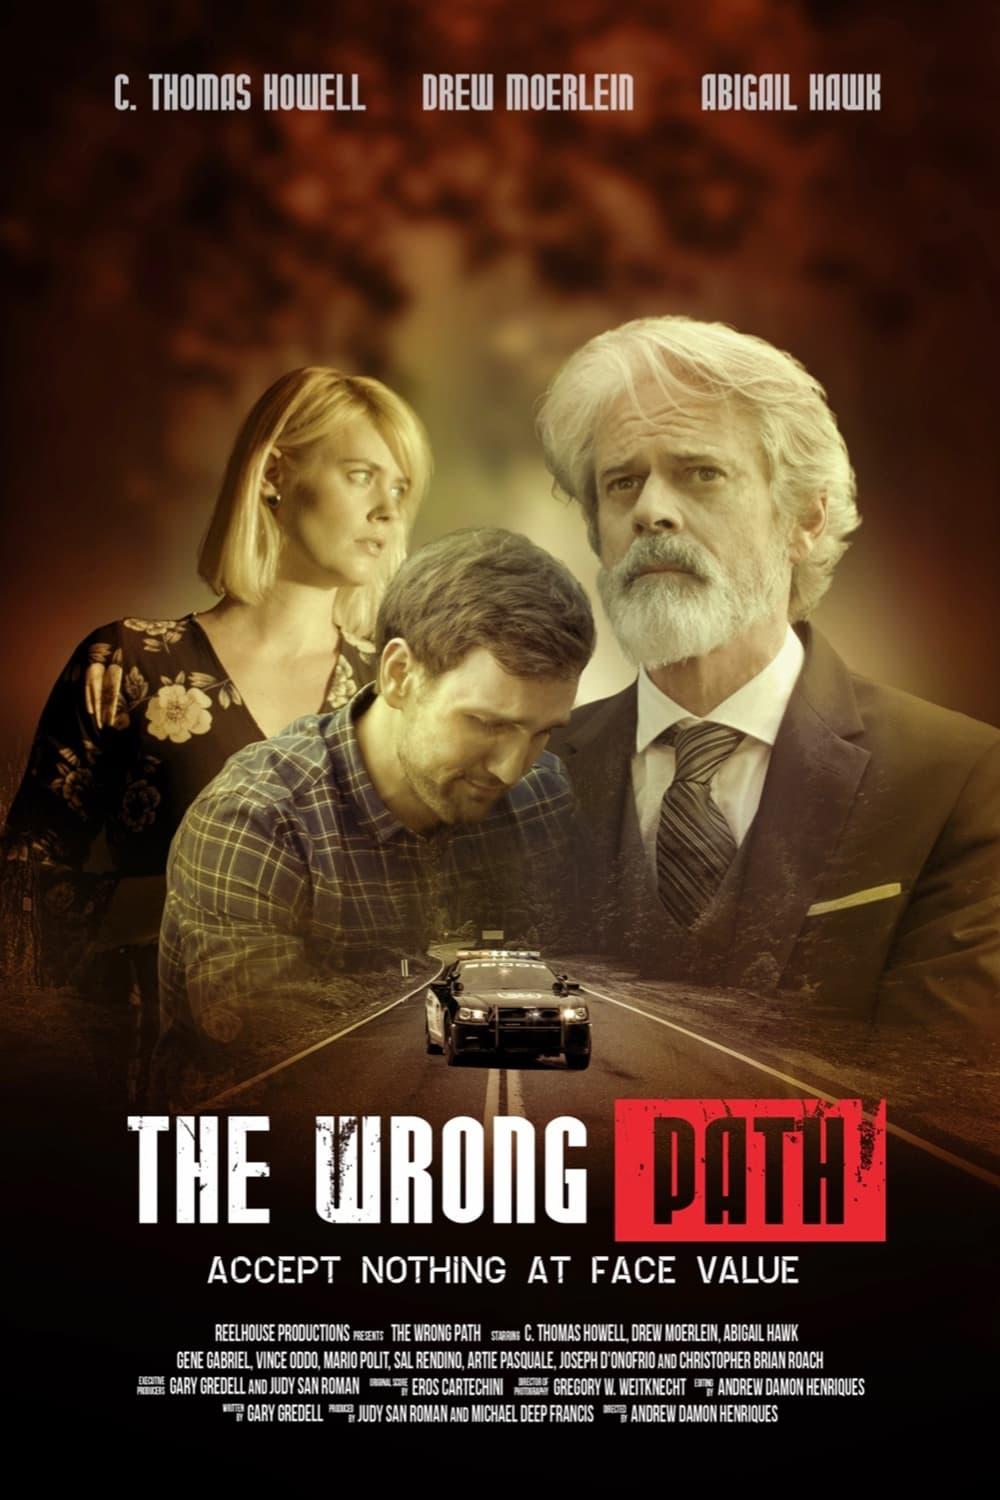 The Wrong Path poster